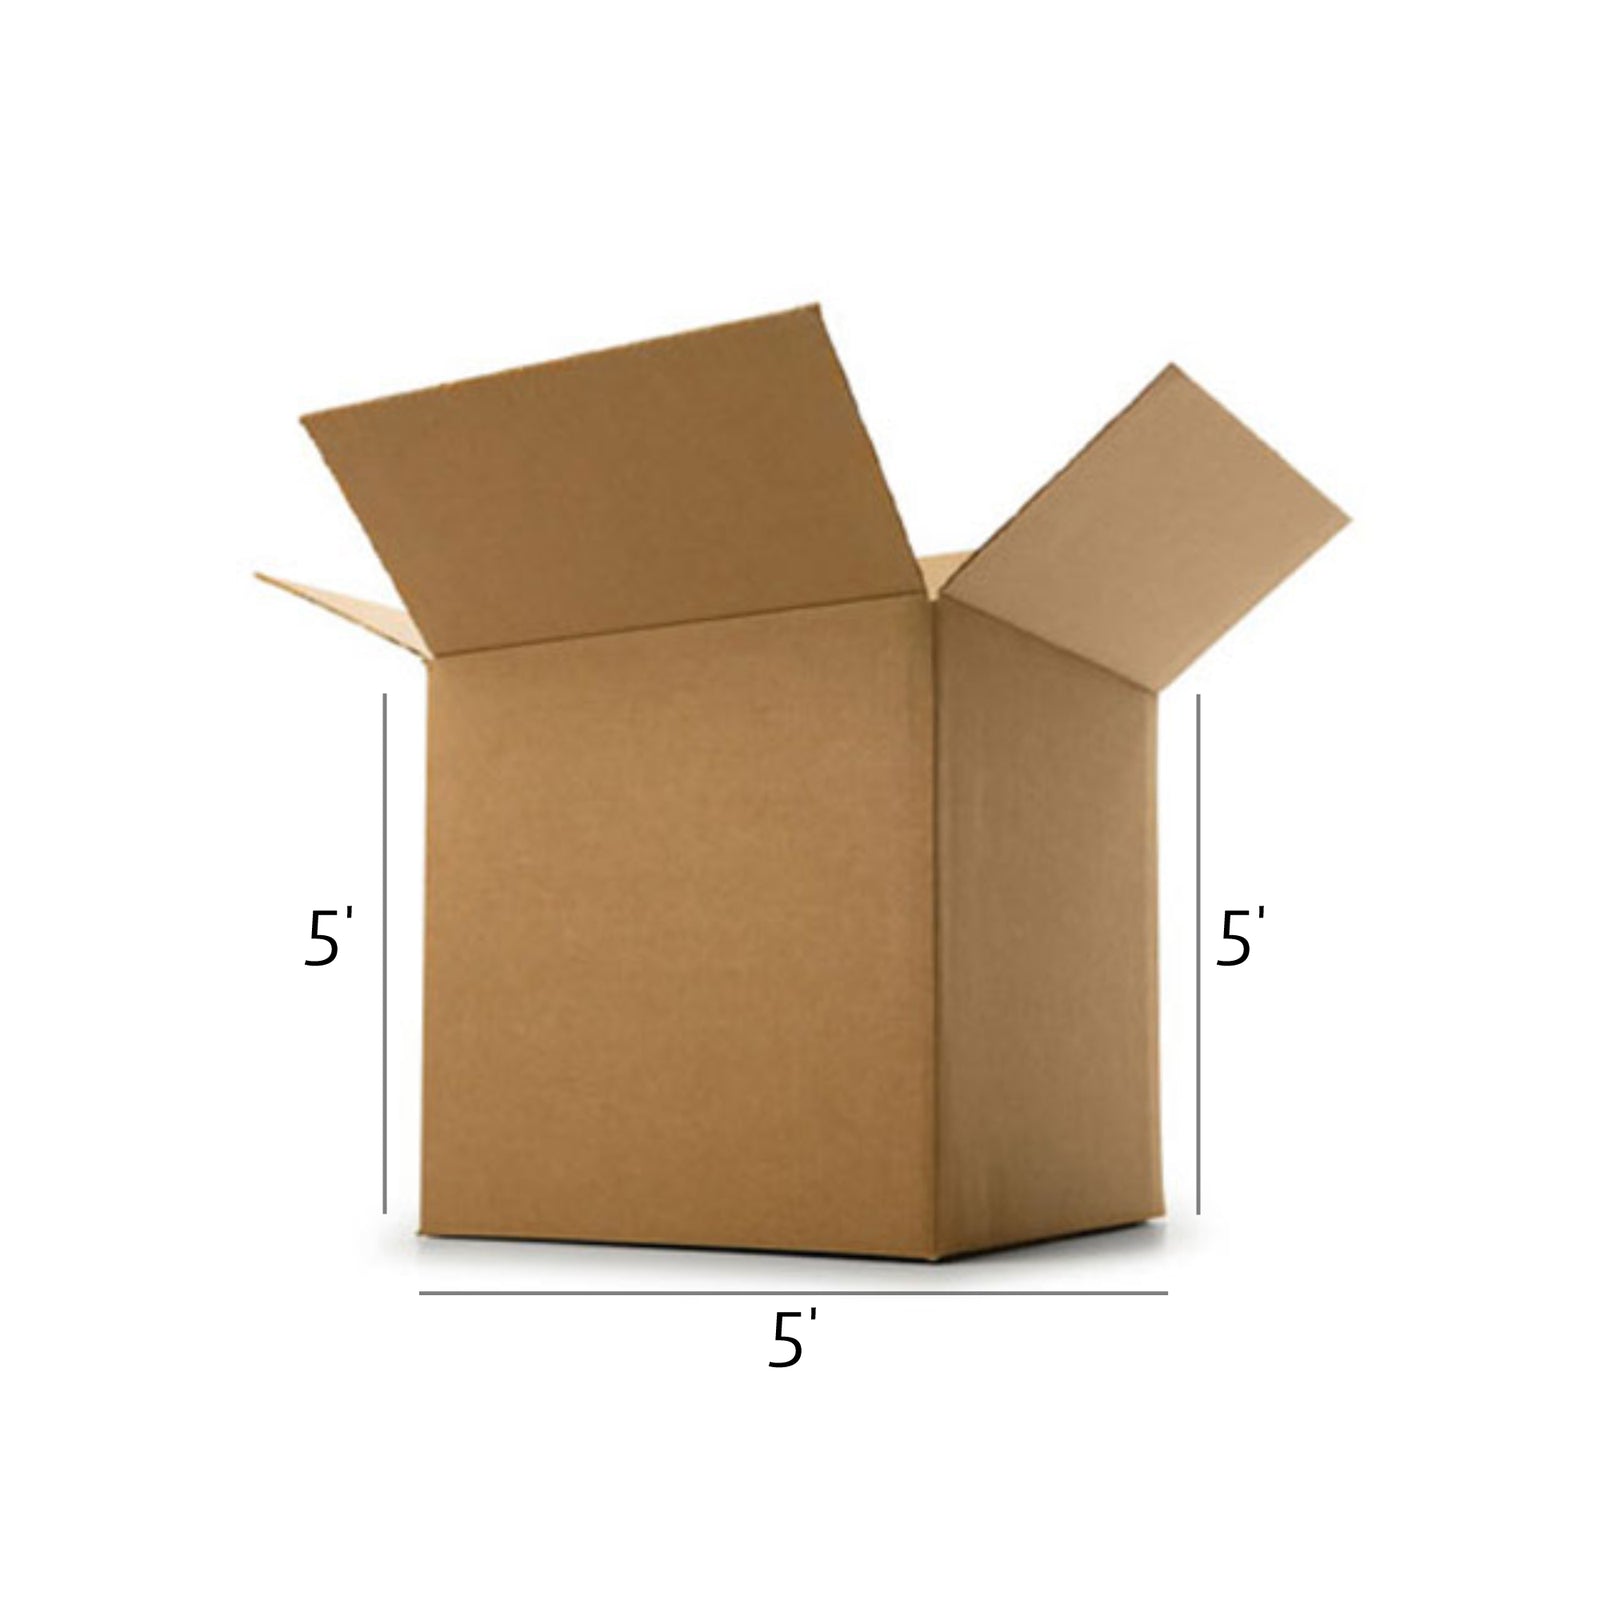 cardboard box, cardboard boxes for moving, cardboard boxes uk, cardboard boxes for sale, large cardboard box, shipping box, buy cardboard box online, cardboard box amazon, cardboard box ebay